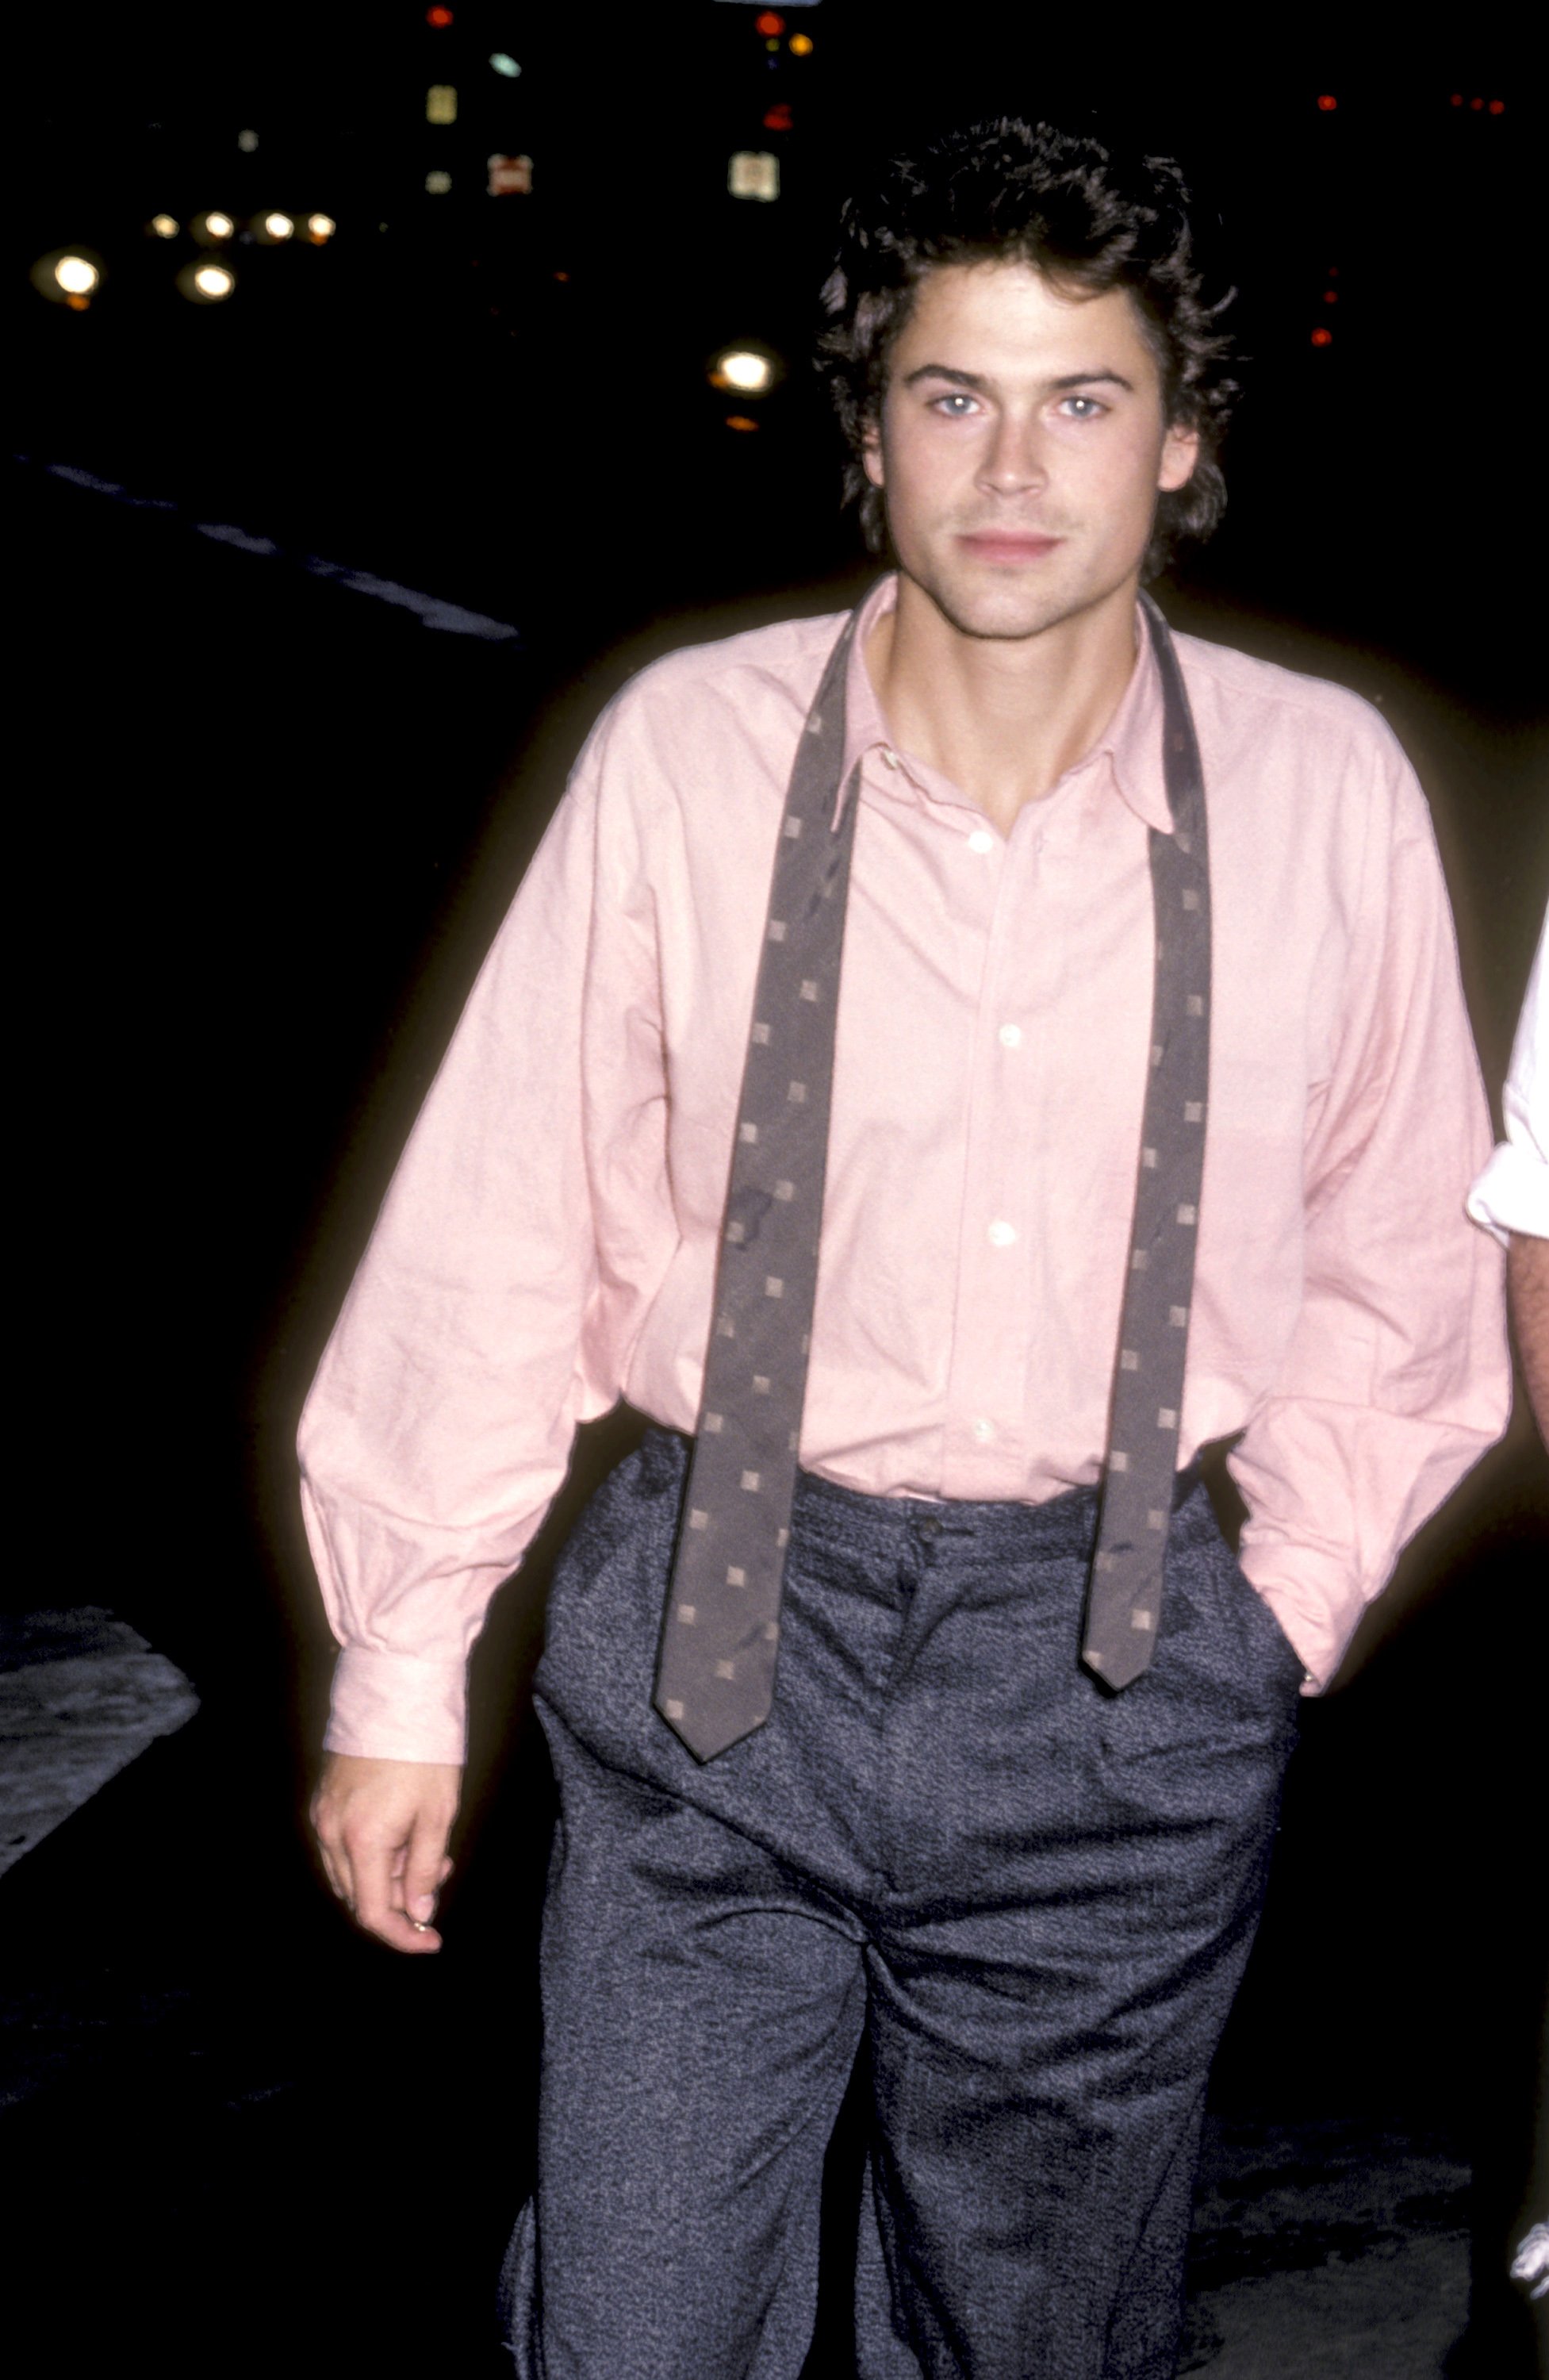 Hollywood hunk Rob Lowe on the set of 1986's romantic comedy film "About Last Night." / Source: Getty Images